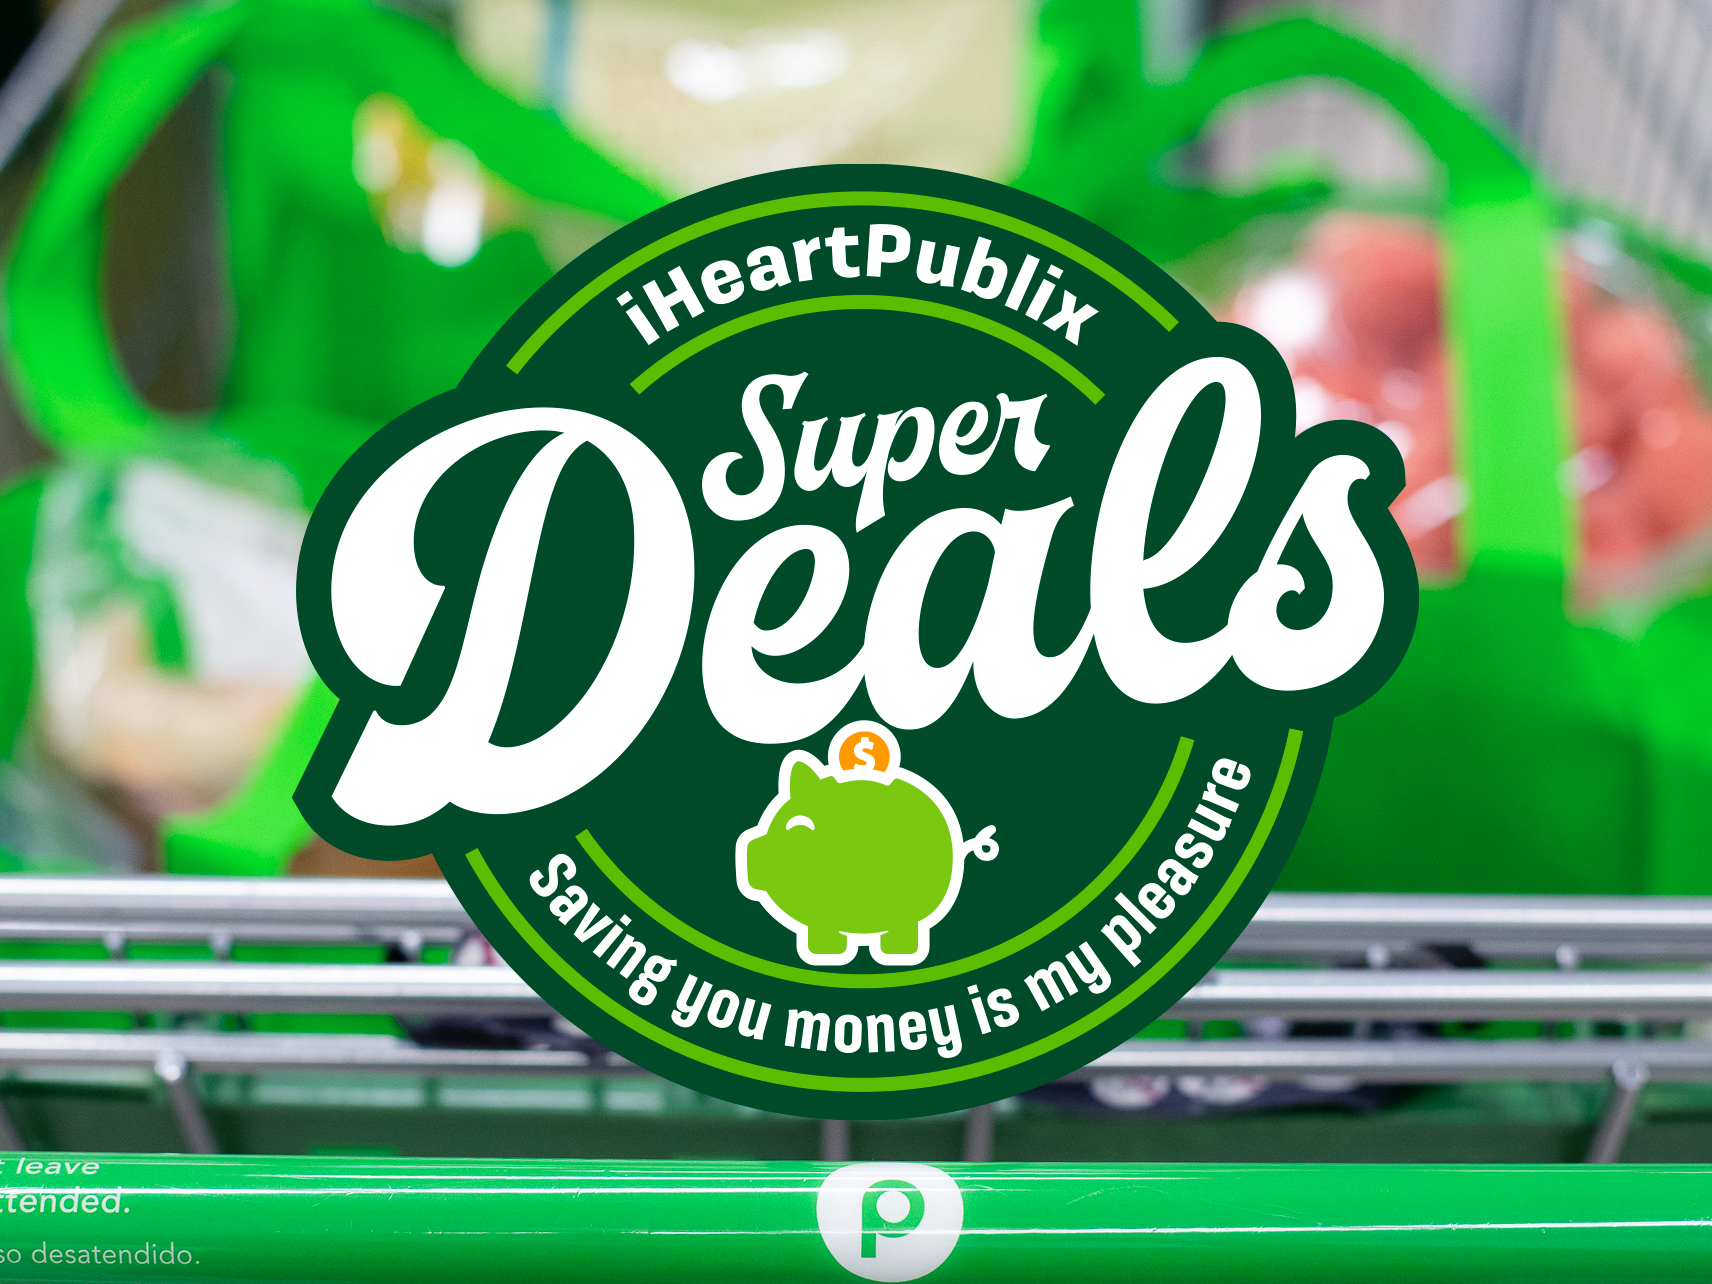 Publix Super Deals Week Of 9/15 to 9/21 (9/14 to 9/20 For Some)